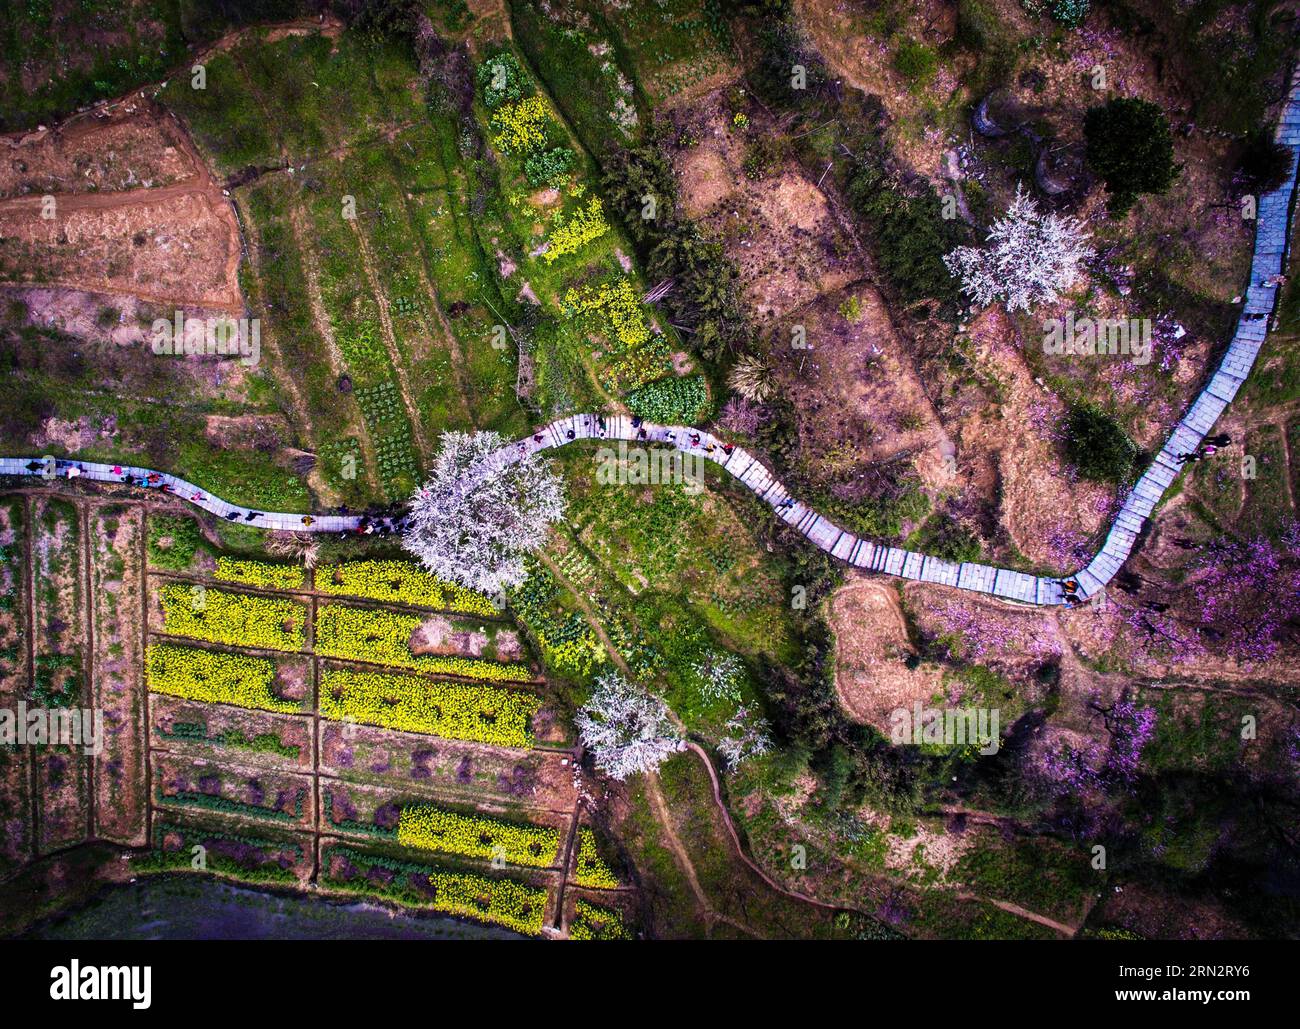 (150323) -- HANGZHOU, March 23, 2015 -- Photo taken on March 23, 2015 shows the scenery in Yangshanfan Village in Tonglu County of Hangzhou City, capital of east China s Zhejiang Province. Various flowers blossom during Spring in Tonglu, attracting tourists to visit the County and promoting the local tourism. ) (zwx) CHINA-HANGZHOU-TONGLU-TOURISM(CN) XuxYu PUBLICATIONxNOTxINxCHN   Hangzhou March 23 2015 Photo Taken ON March 23 2015 Shows The scenery in  Village in Tonglu County of Hangzhou City Capital of East China S Zhejiang Province Various Flowers Blossom during Spring in Tonglu Attracting Stock Photo